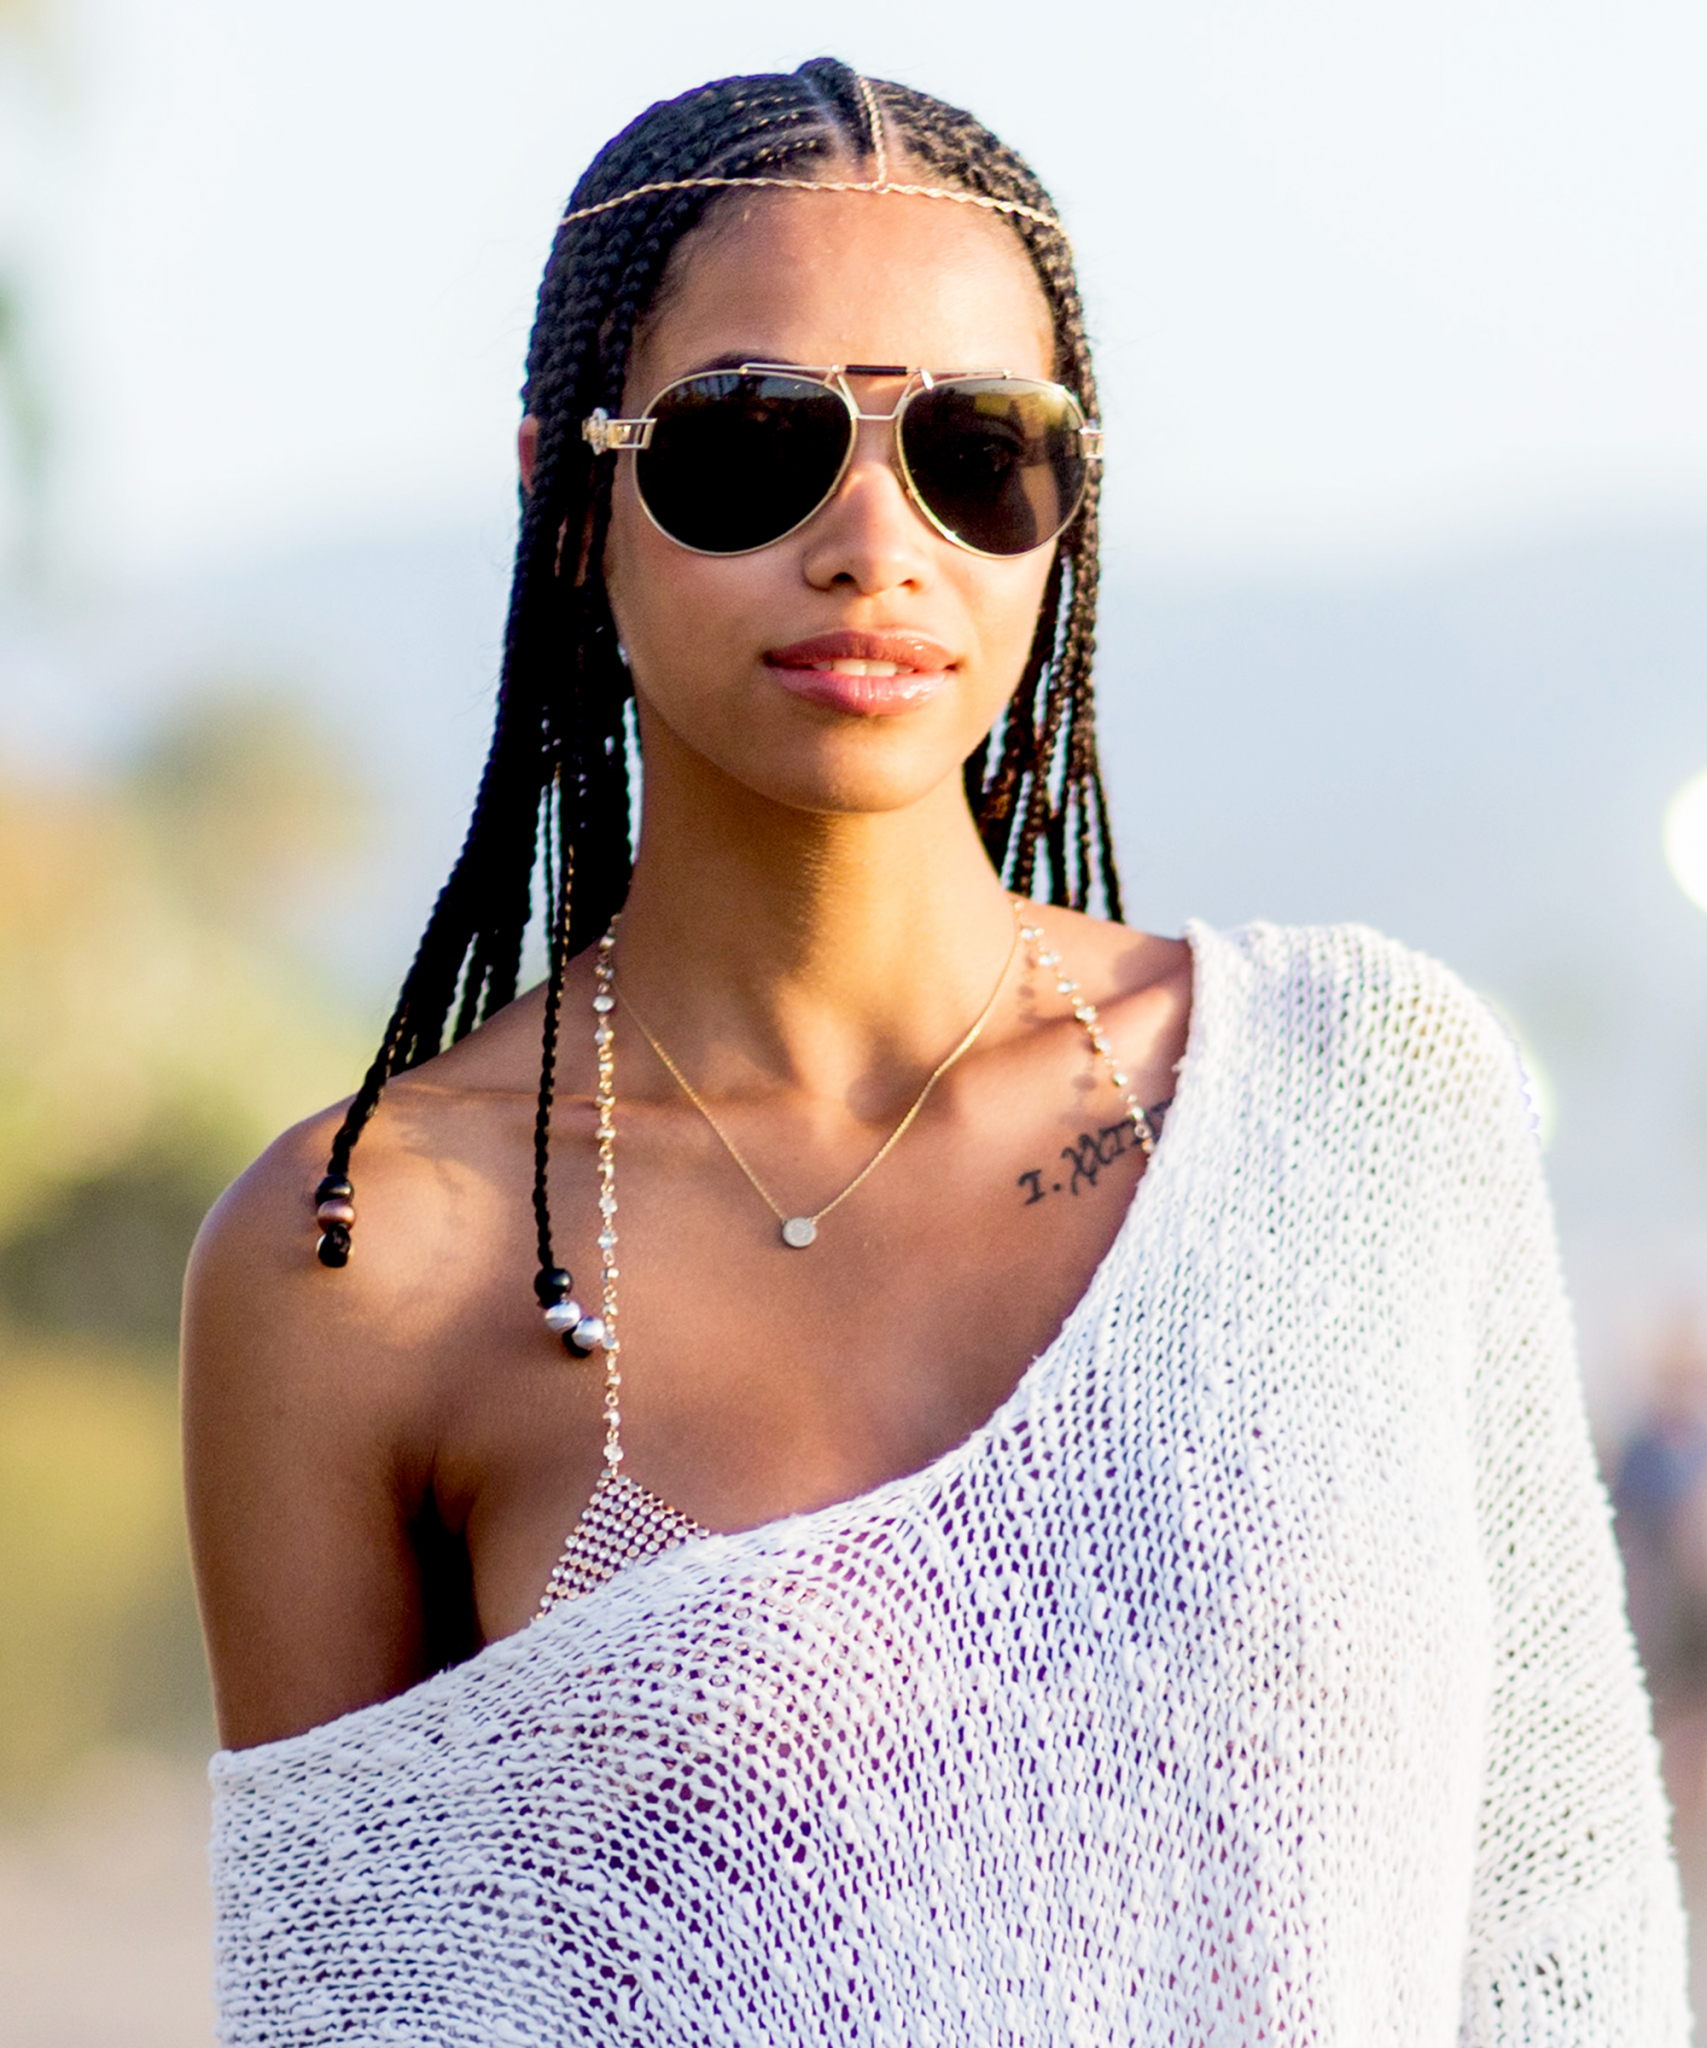 How To Make Your Box Braids & Cornrows Look Even Cooler | Oye! Times